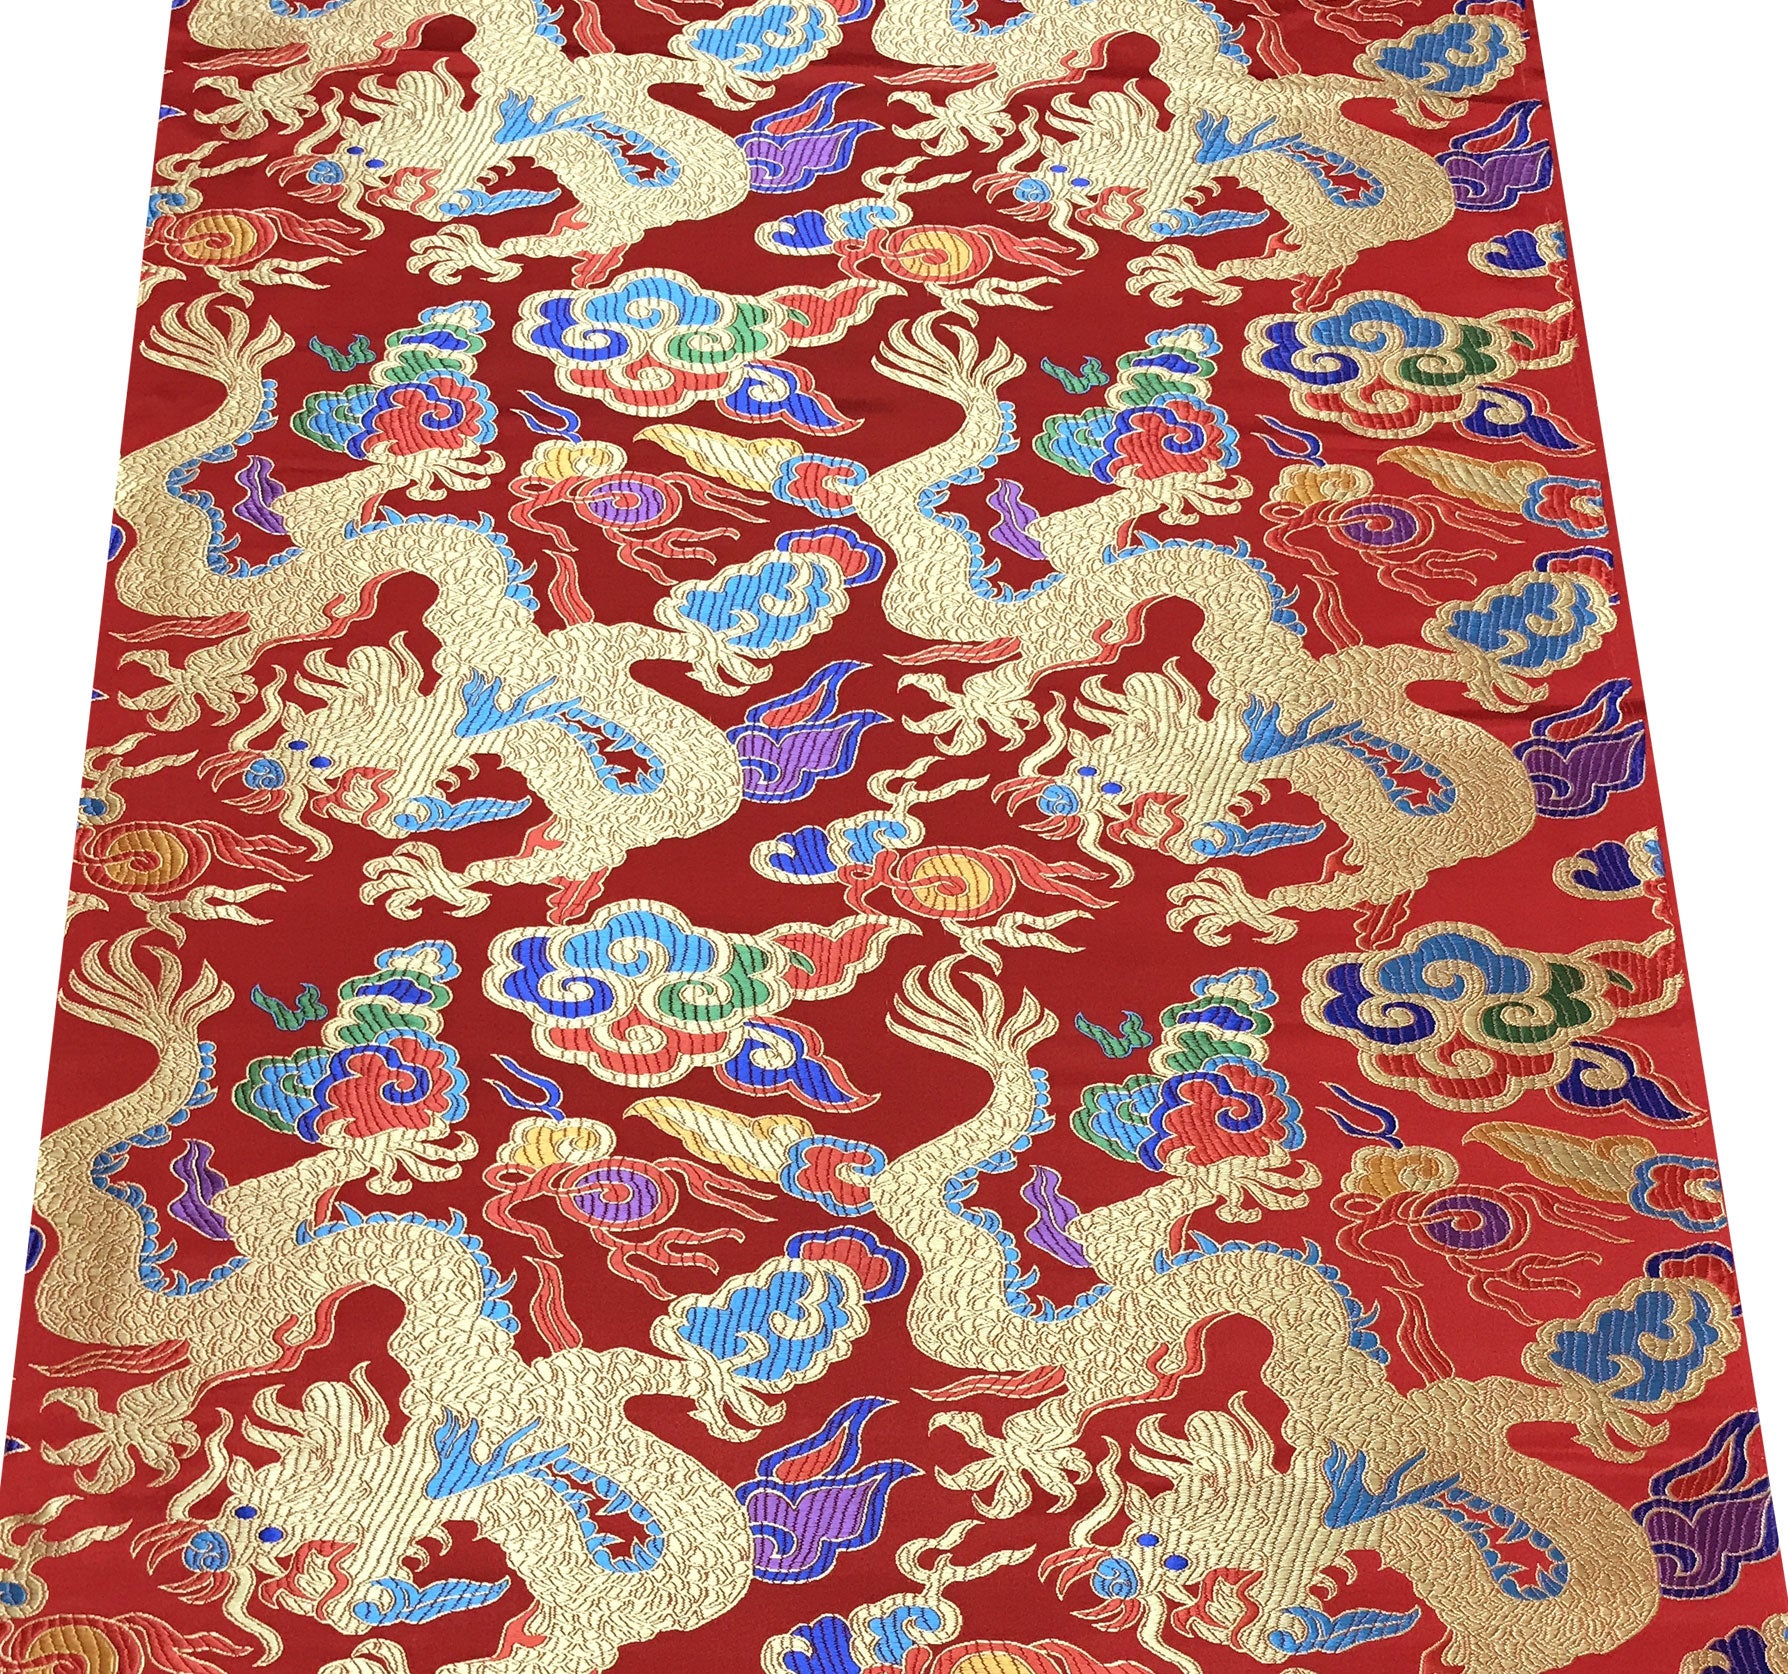 Golden Dragon on Colorful Cloud Brocade Fabric - Red – Pearl River ...